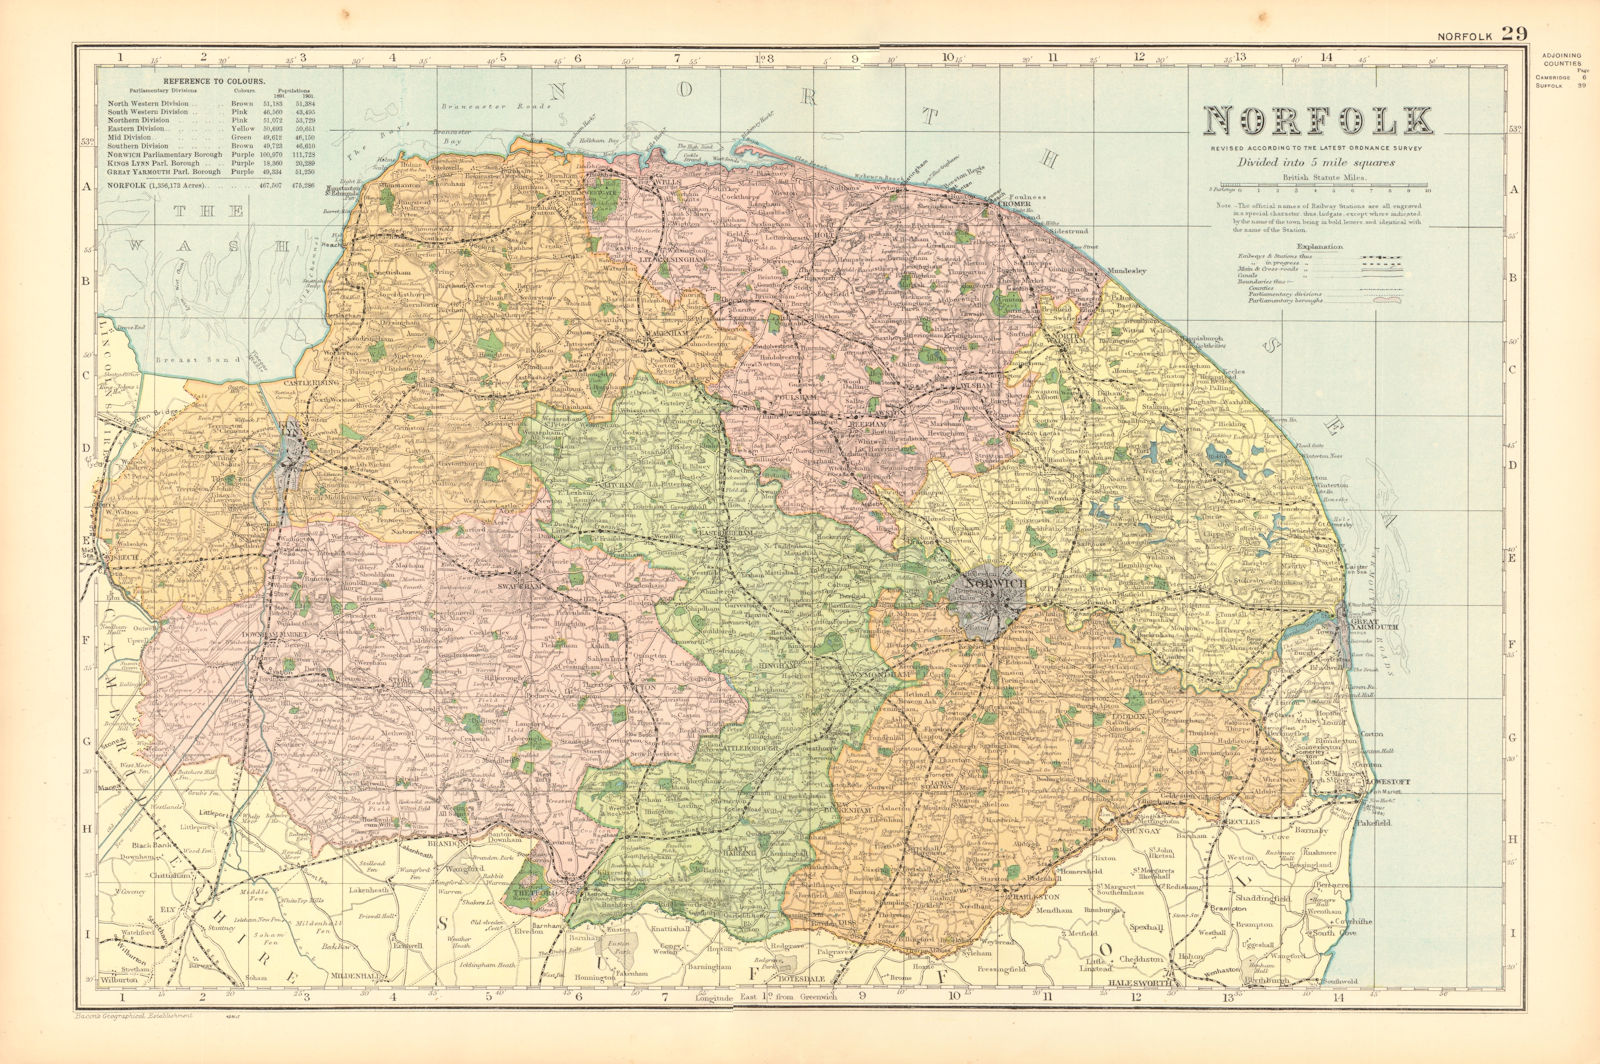 NORFOLK. Showing Parliamentary divisions, boroughs & parks. BACON 1904 old map